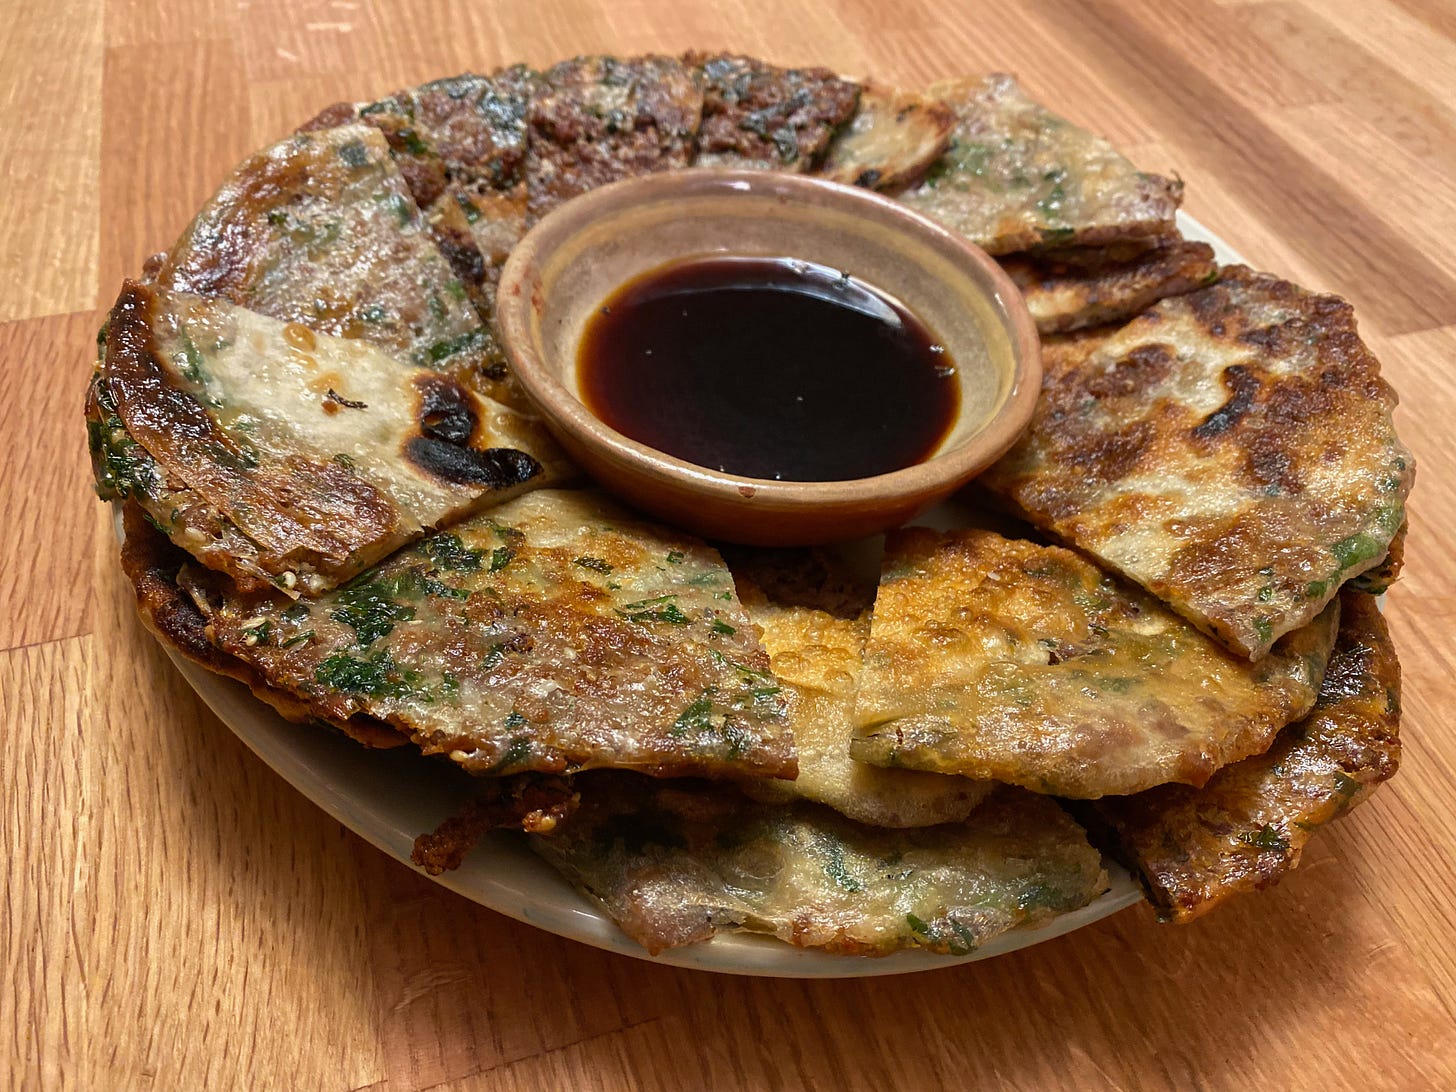 An overflowing plate of golden-brown pancakes, cut into triangles, sits on a wooden counter. There’s a small bowl of soy sauce in the middle of the plate.